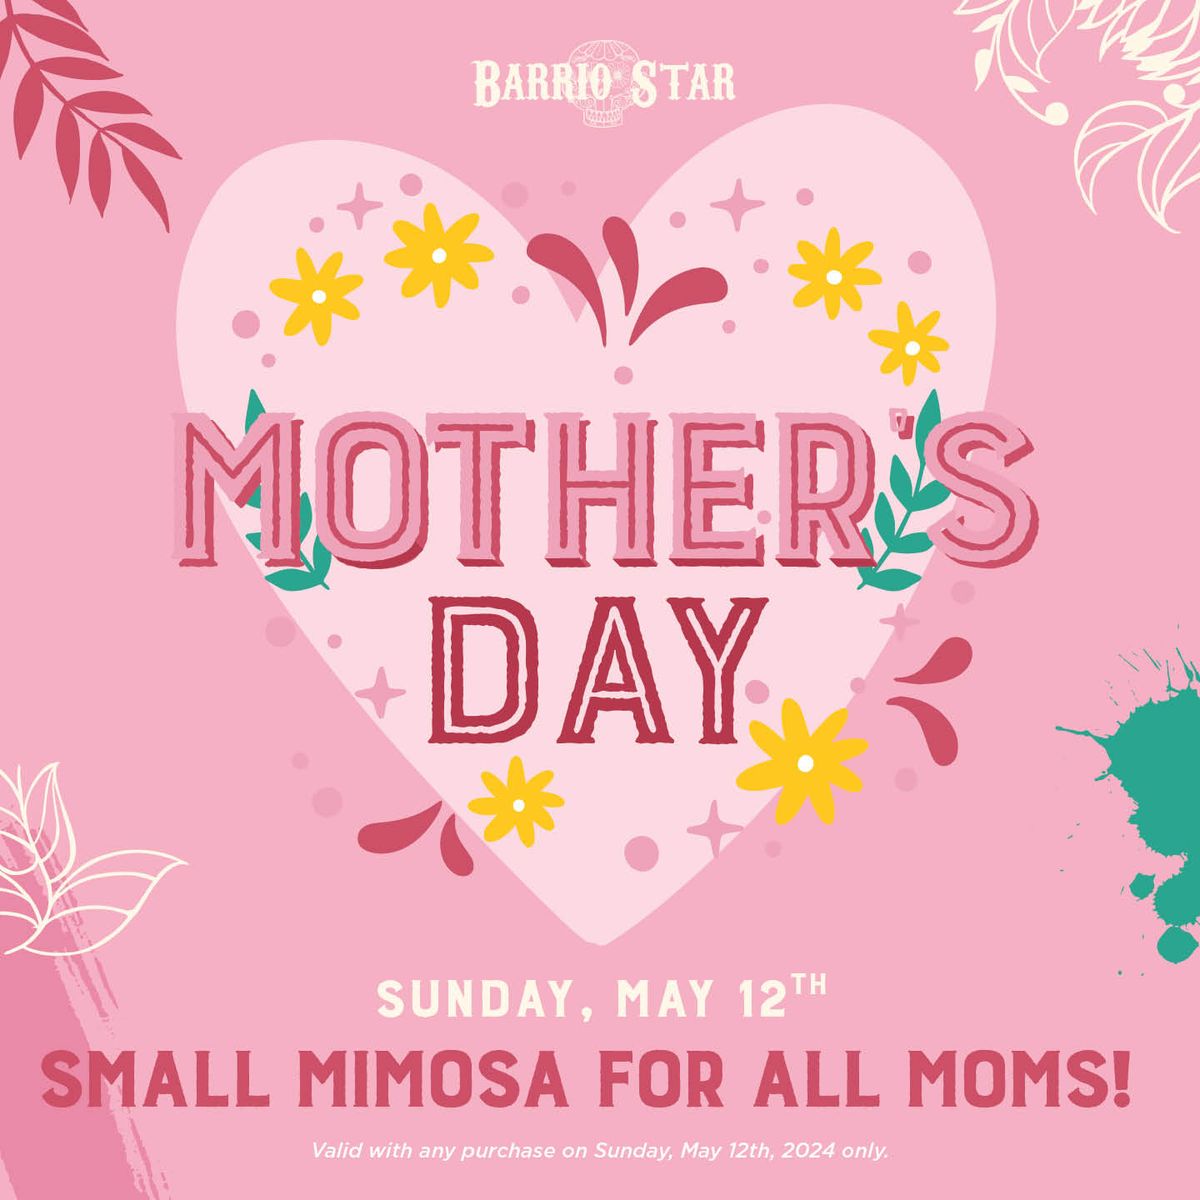 Mother's Day at Barrio Star